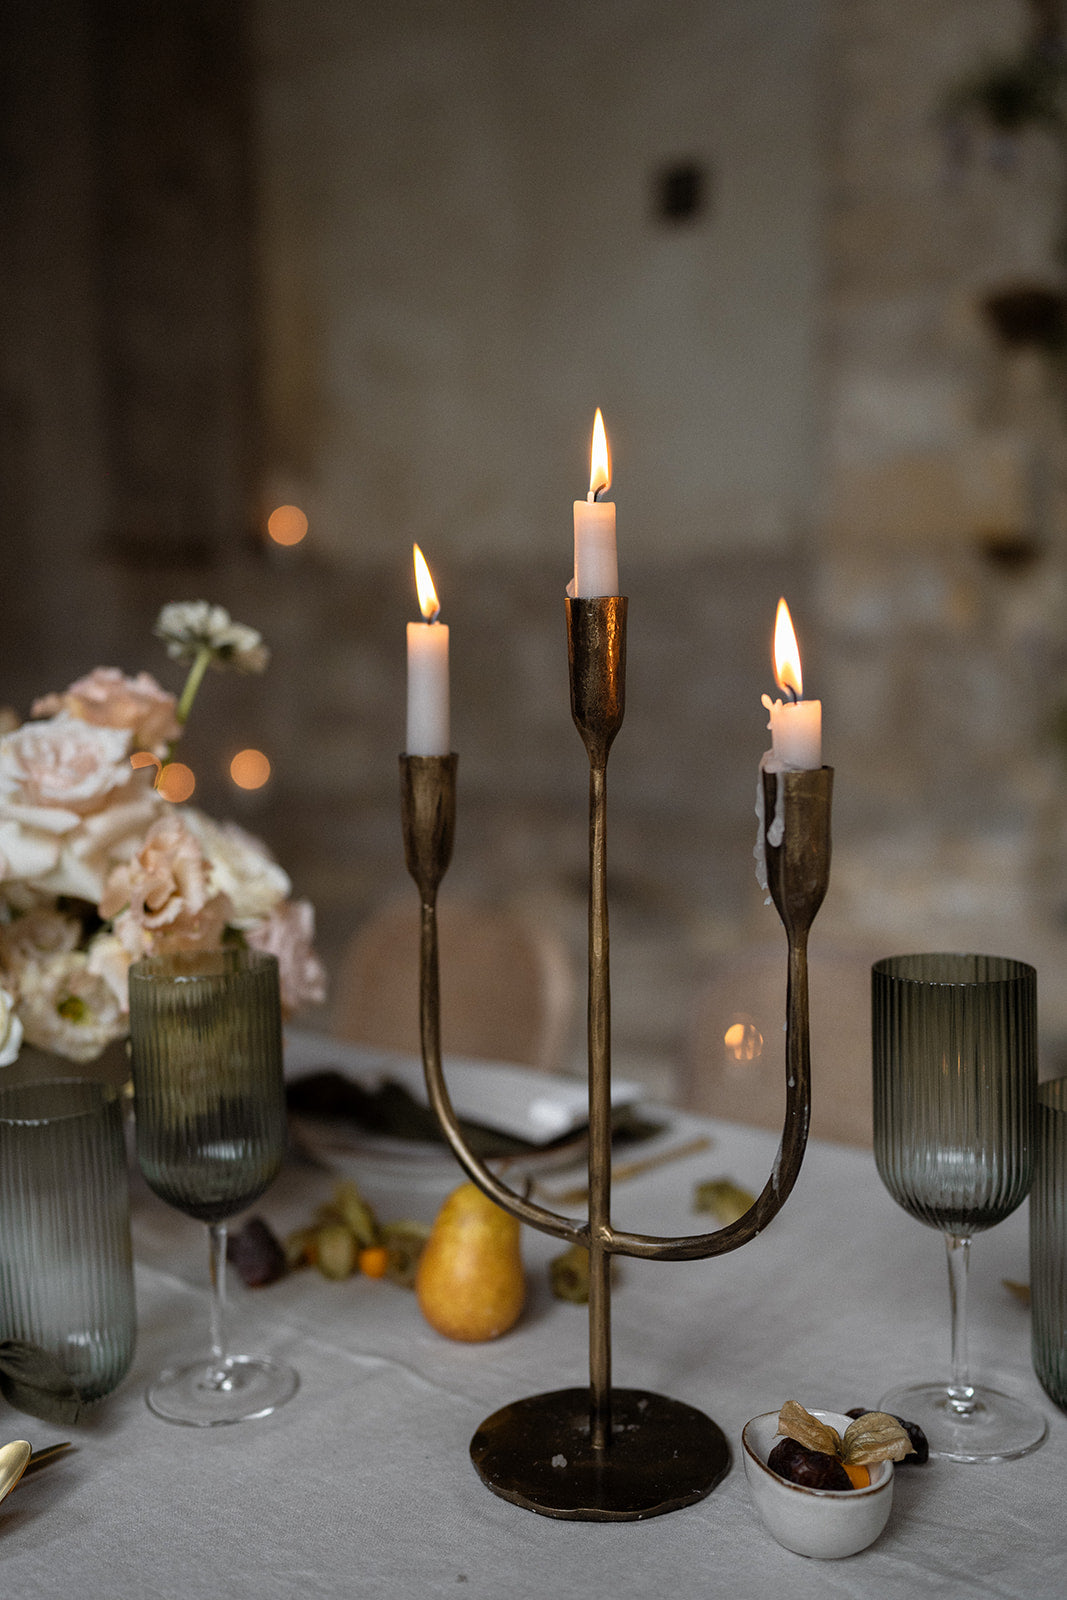 What a Host Home: Wedding Tablescape with gold cutlery, linen table napkins, porcelain round plates, gold candle holders